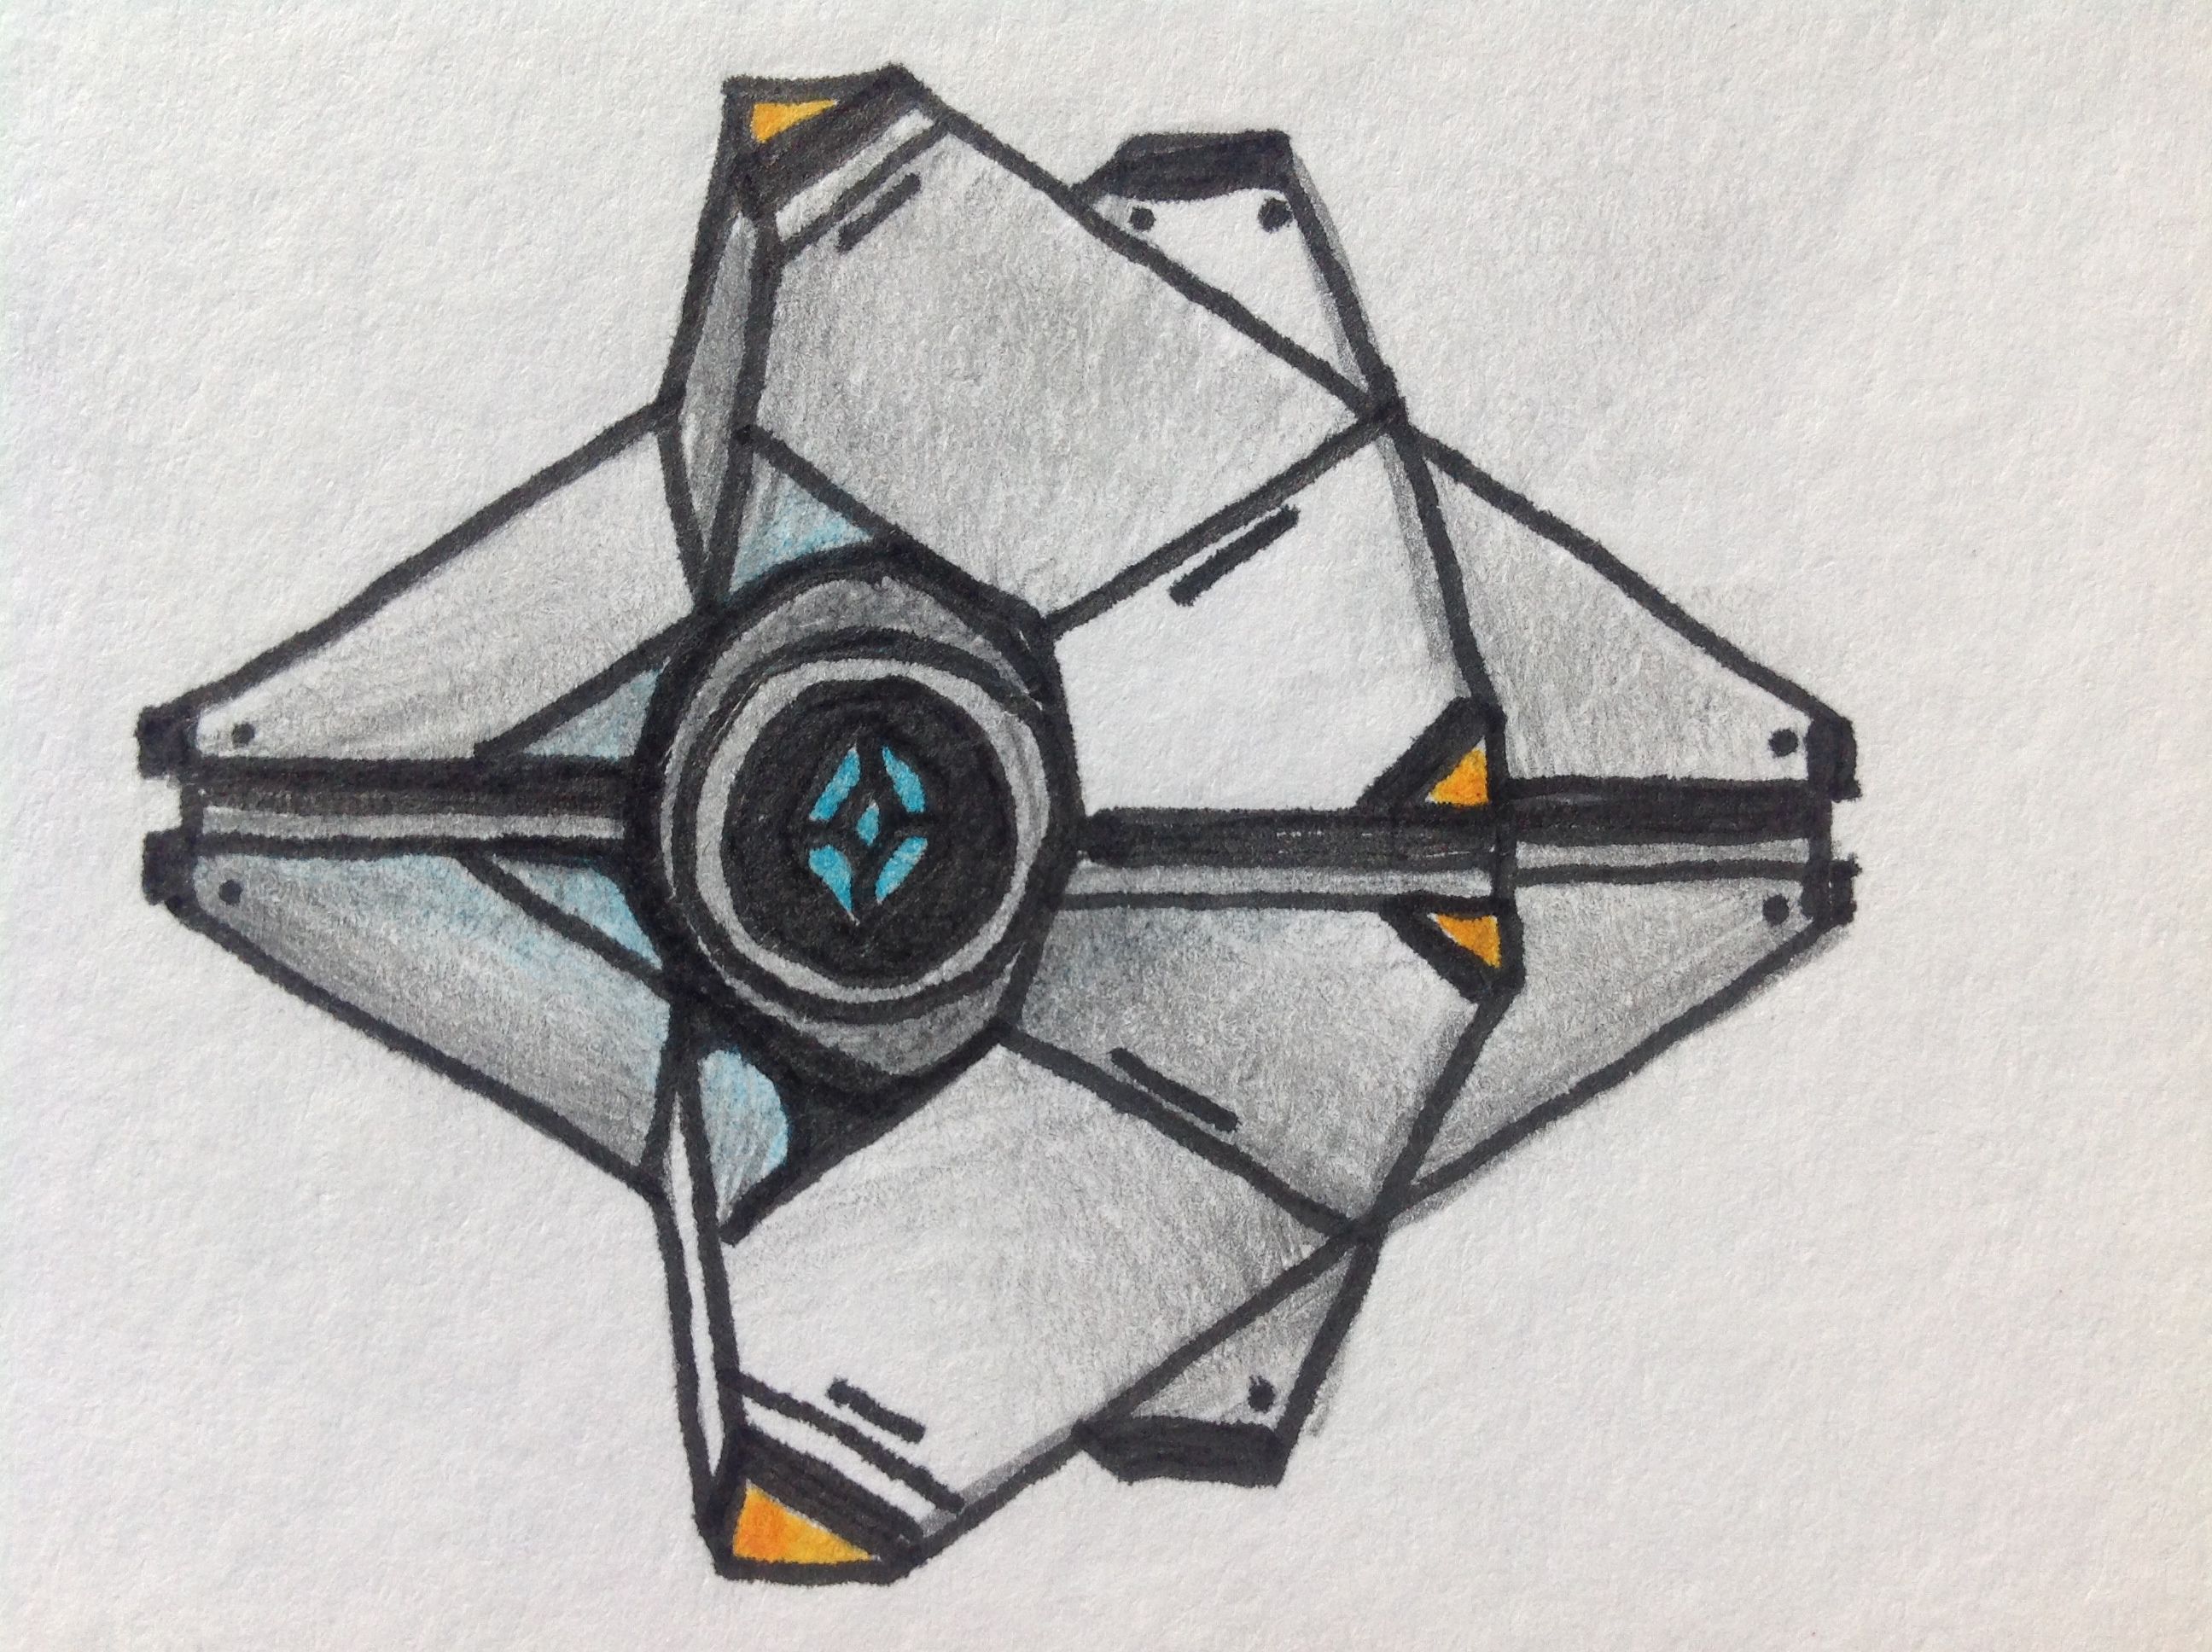 2592x1936 High Res Image Of My Drawn Ghost, As Requested - Destiny Ghost Dr...